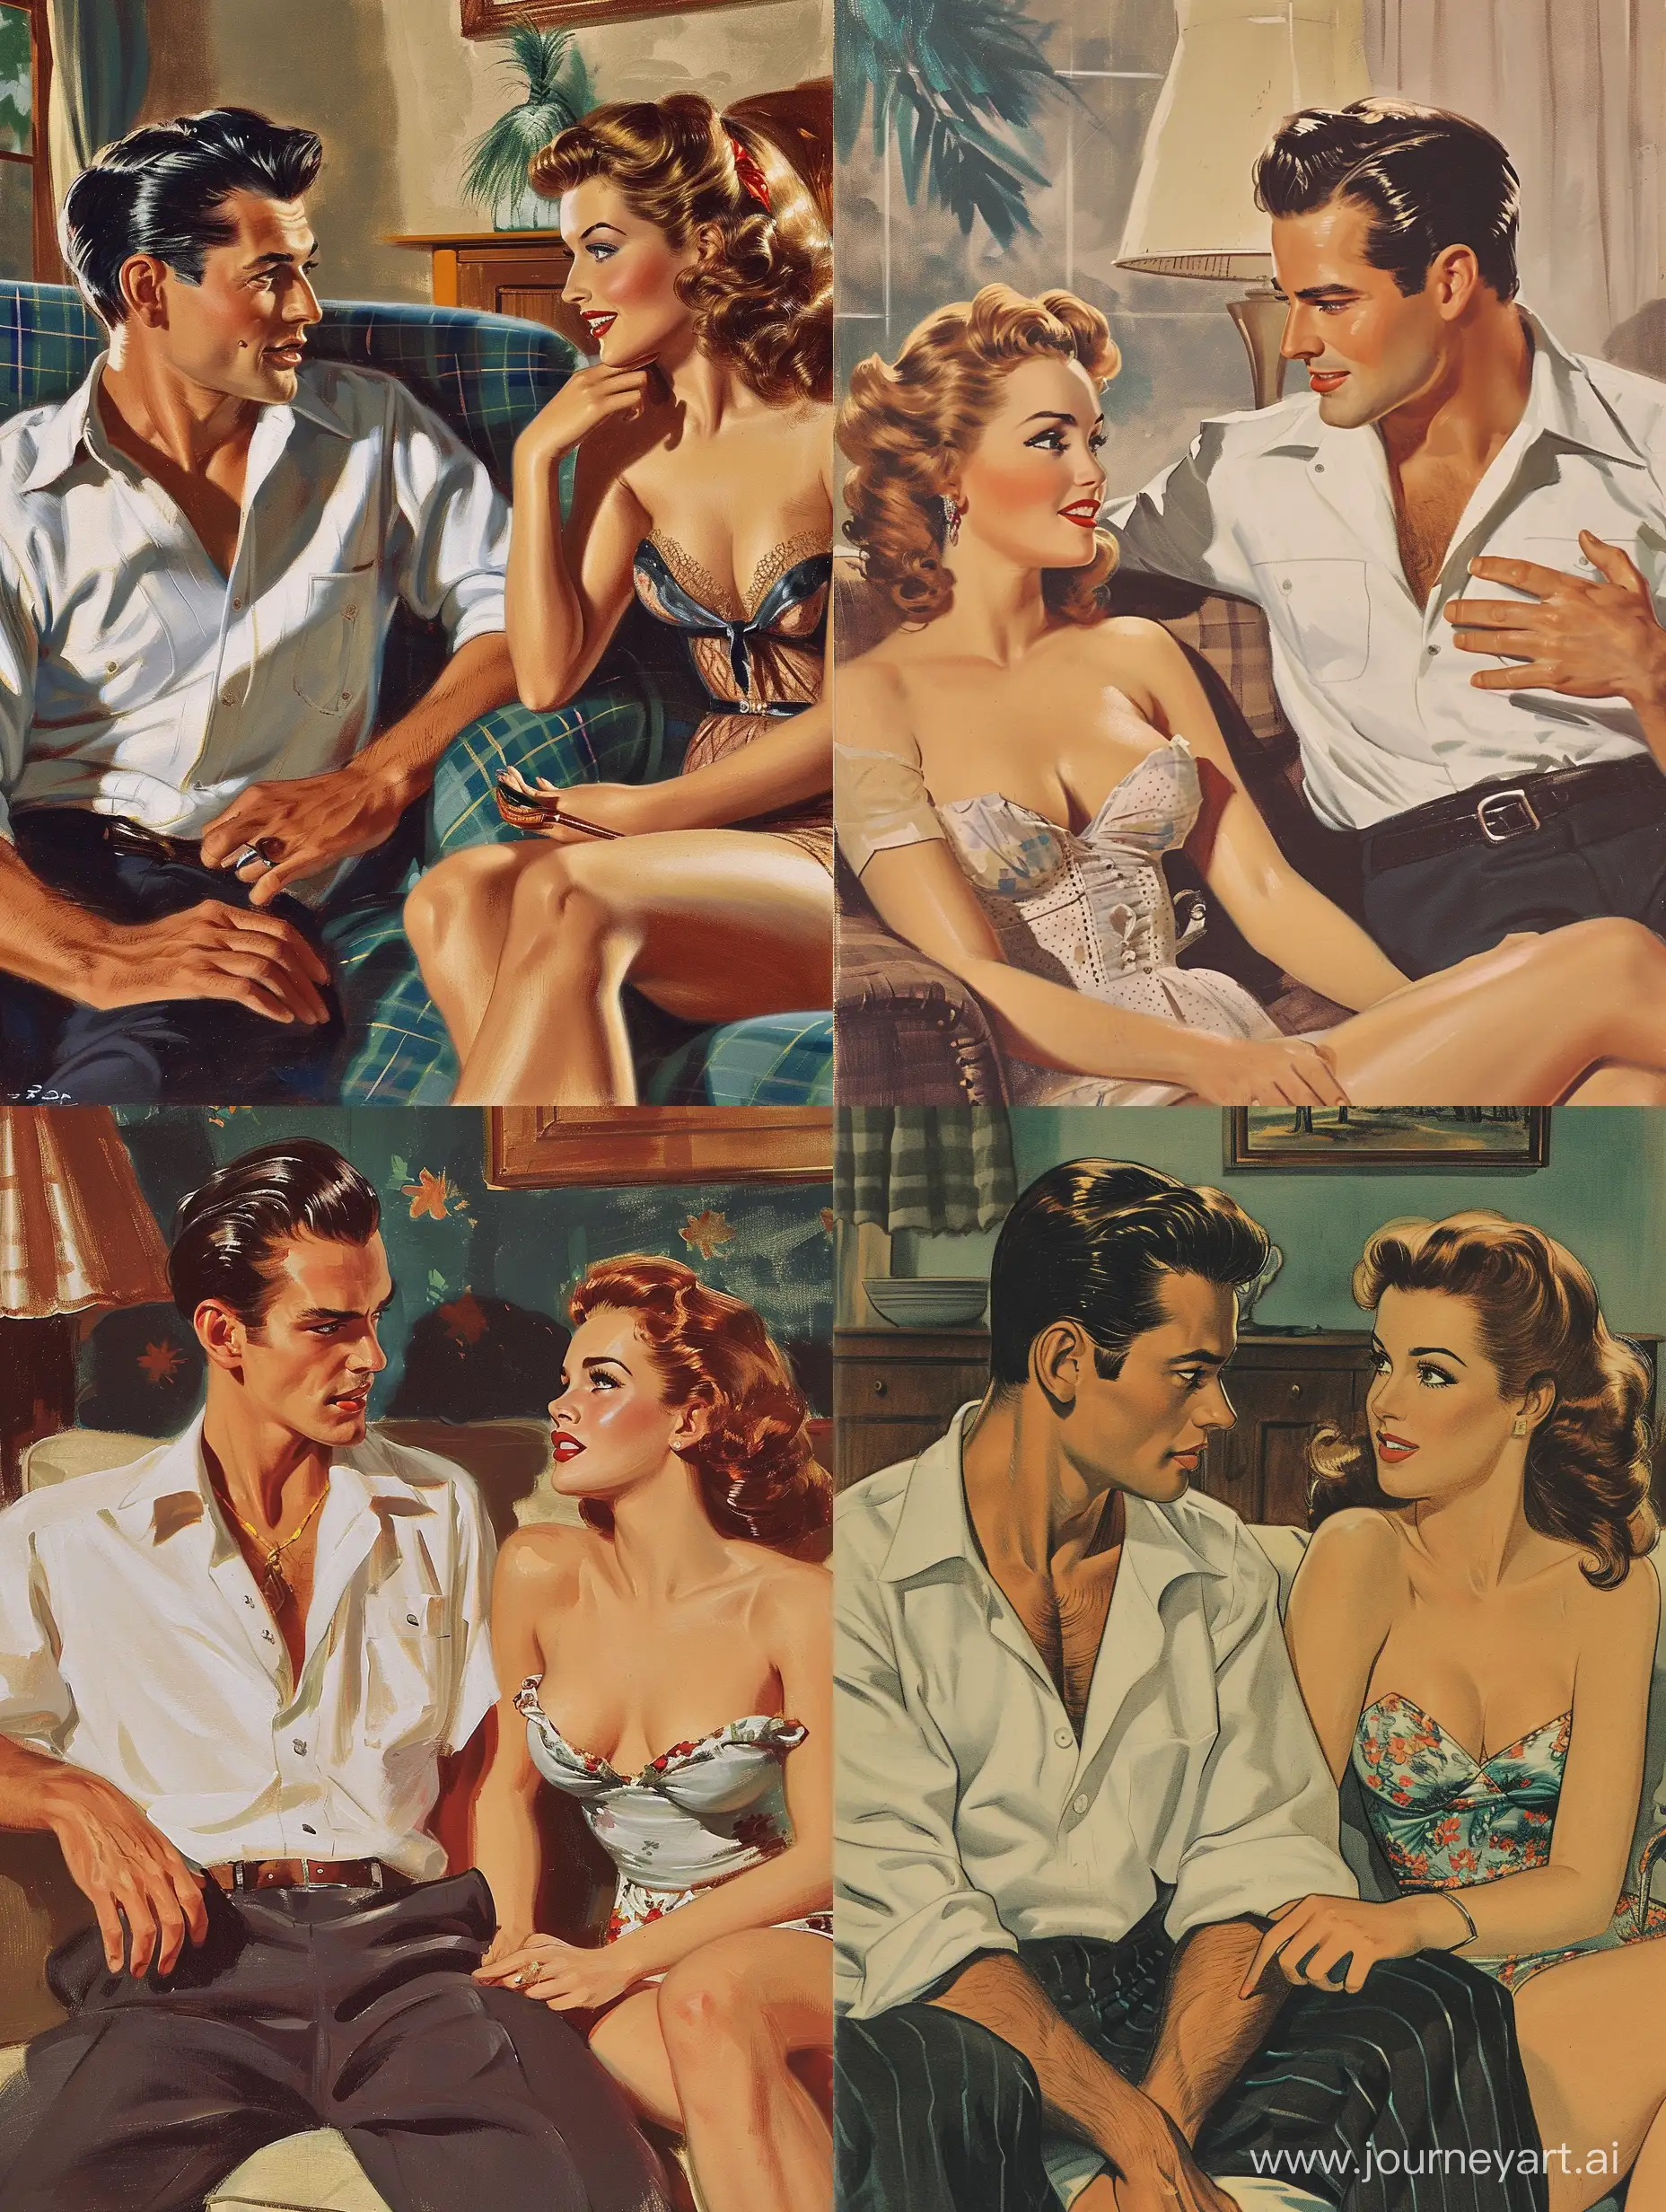 Robert Maguire style Pulp art of a handsome vintage 1940s handsome movie star man wearing a white shirt talking with with a pretty 1940s female fatale woman wearing vintage 1940s lingerie, both sitting on a couch, cozy 1940s Buenos Aires apartmemt interior--ar 3:4